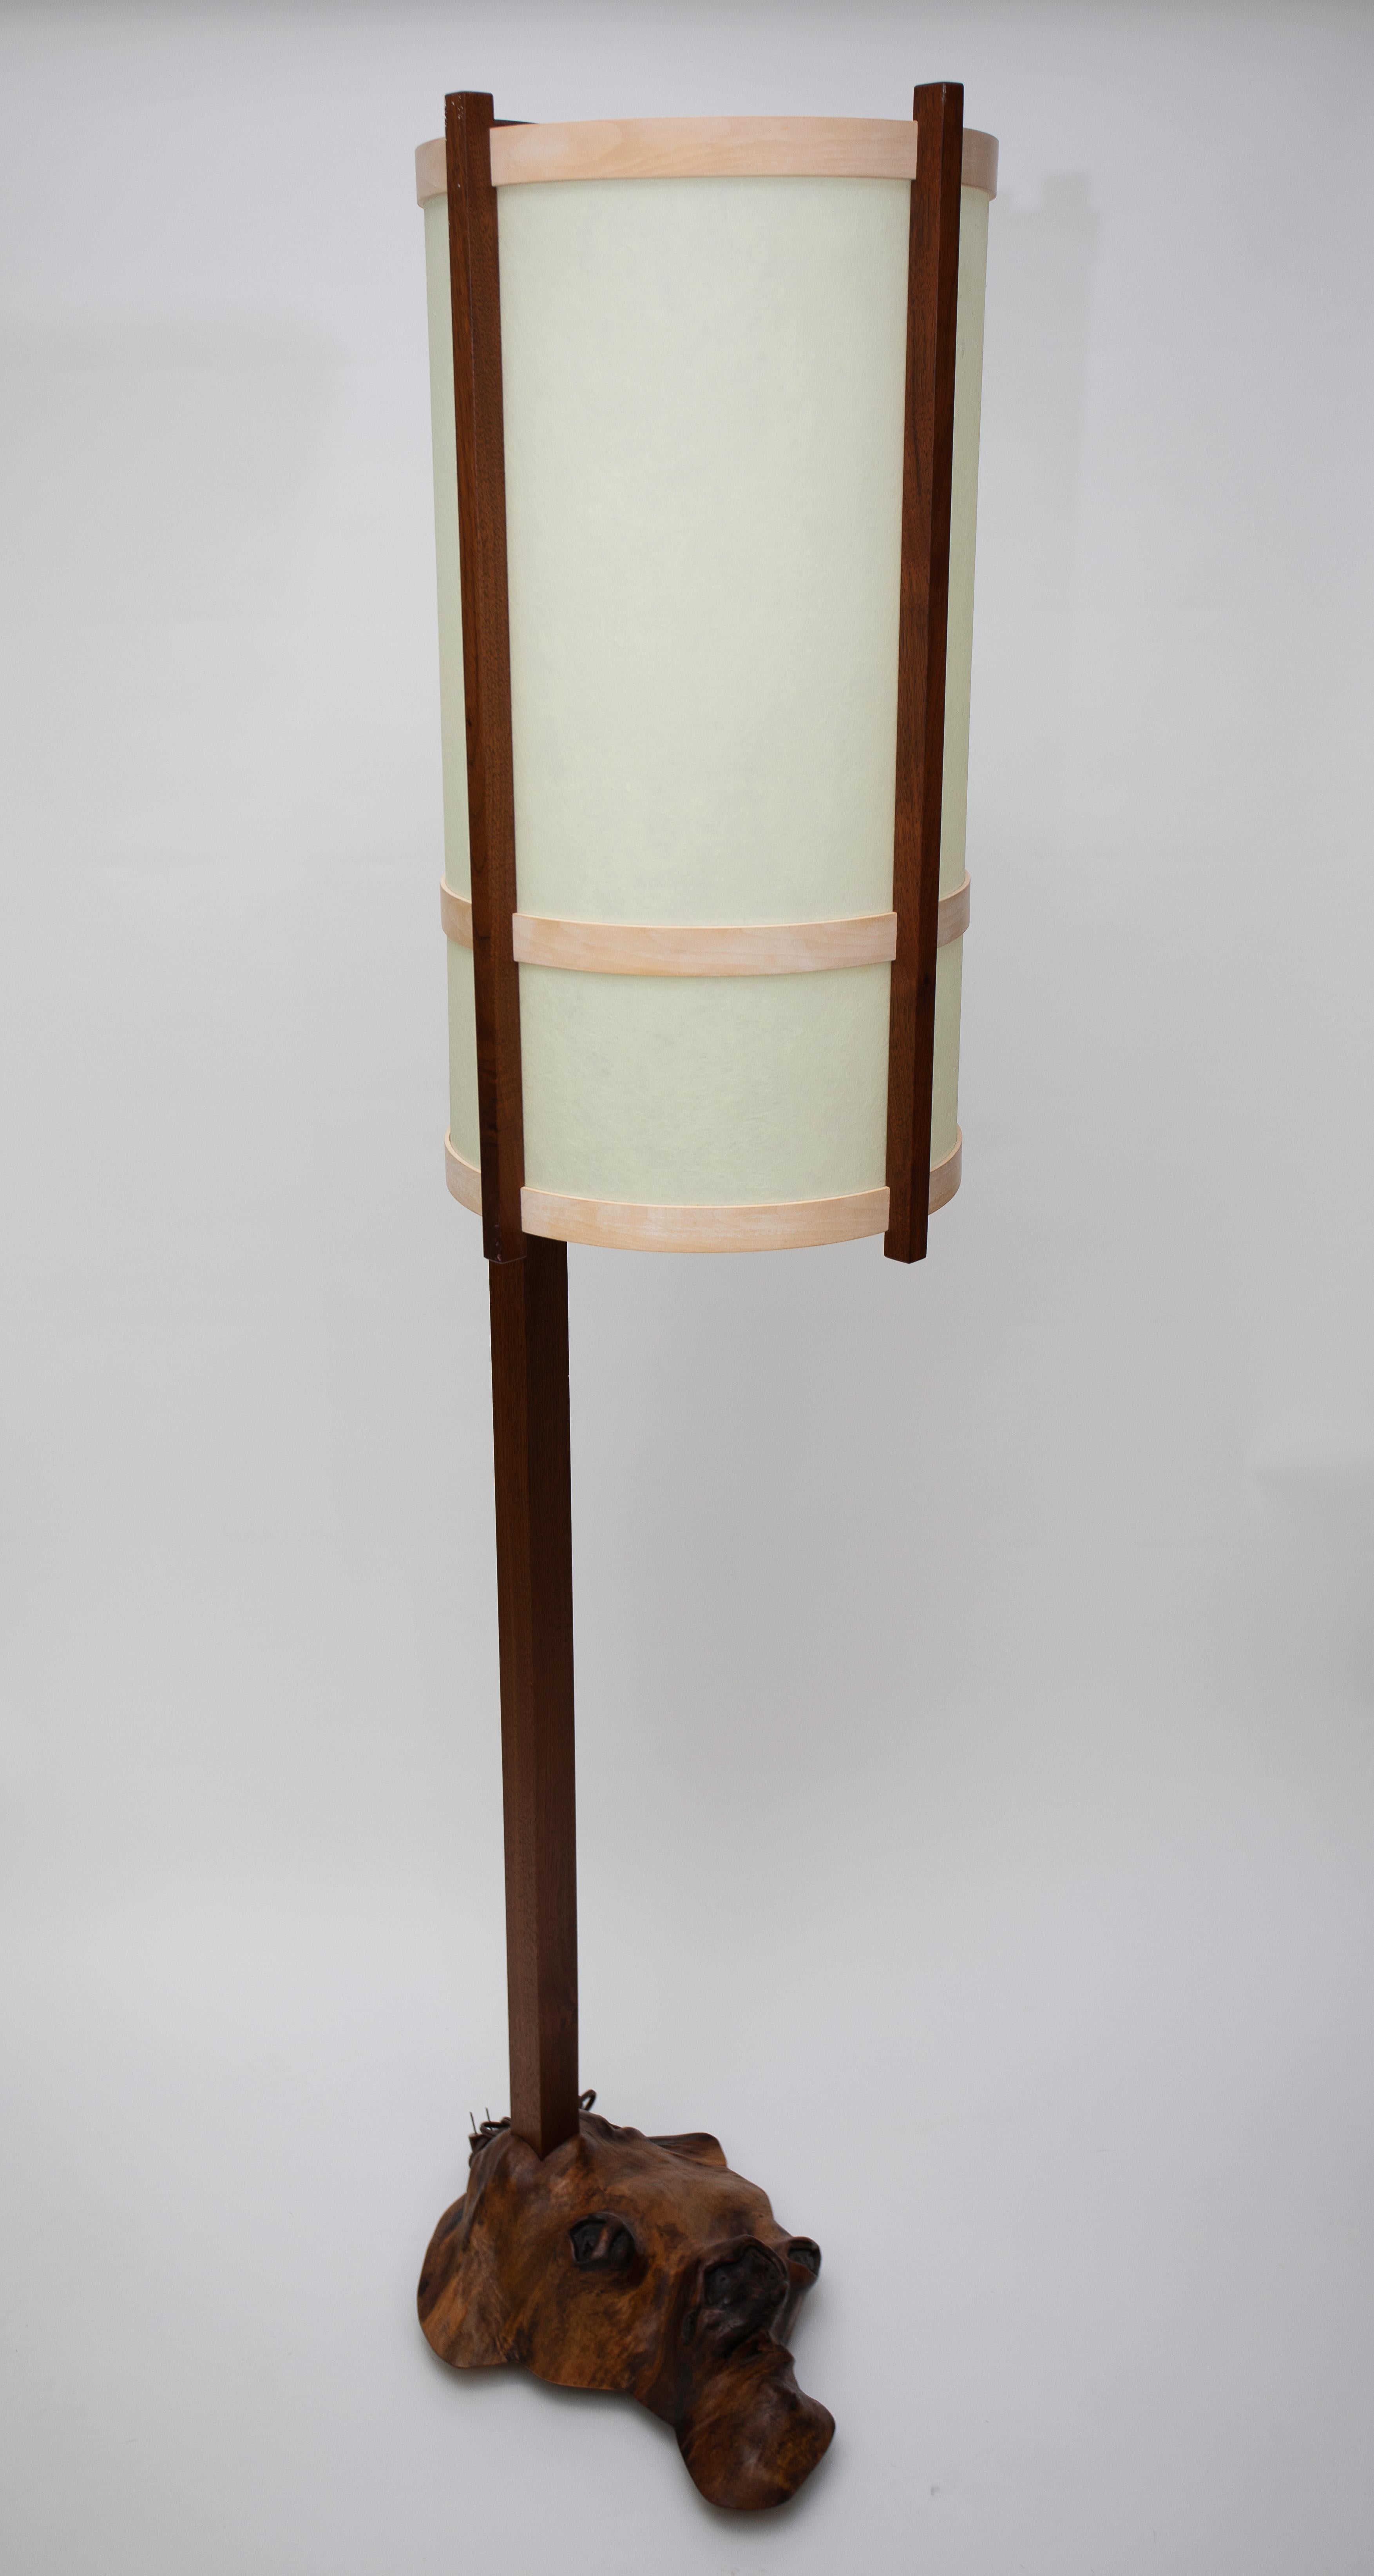 A wonderful Root- Based Floor lamp.
Original finish and Shade.
Signed Mira Nakashima on underside of base with date and clients name.